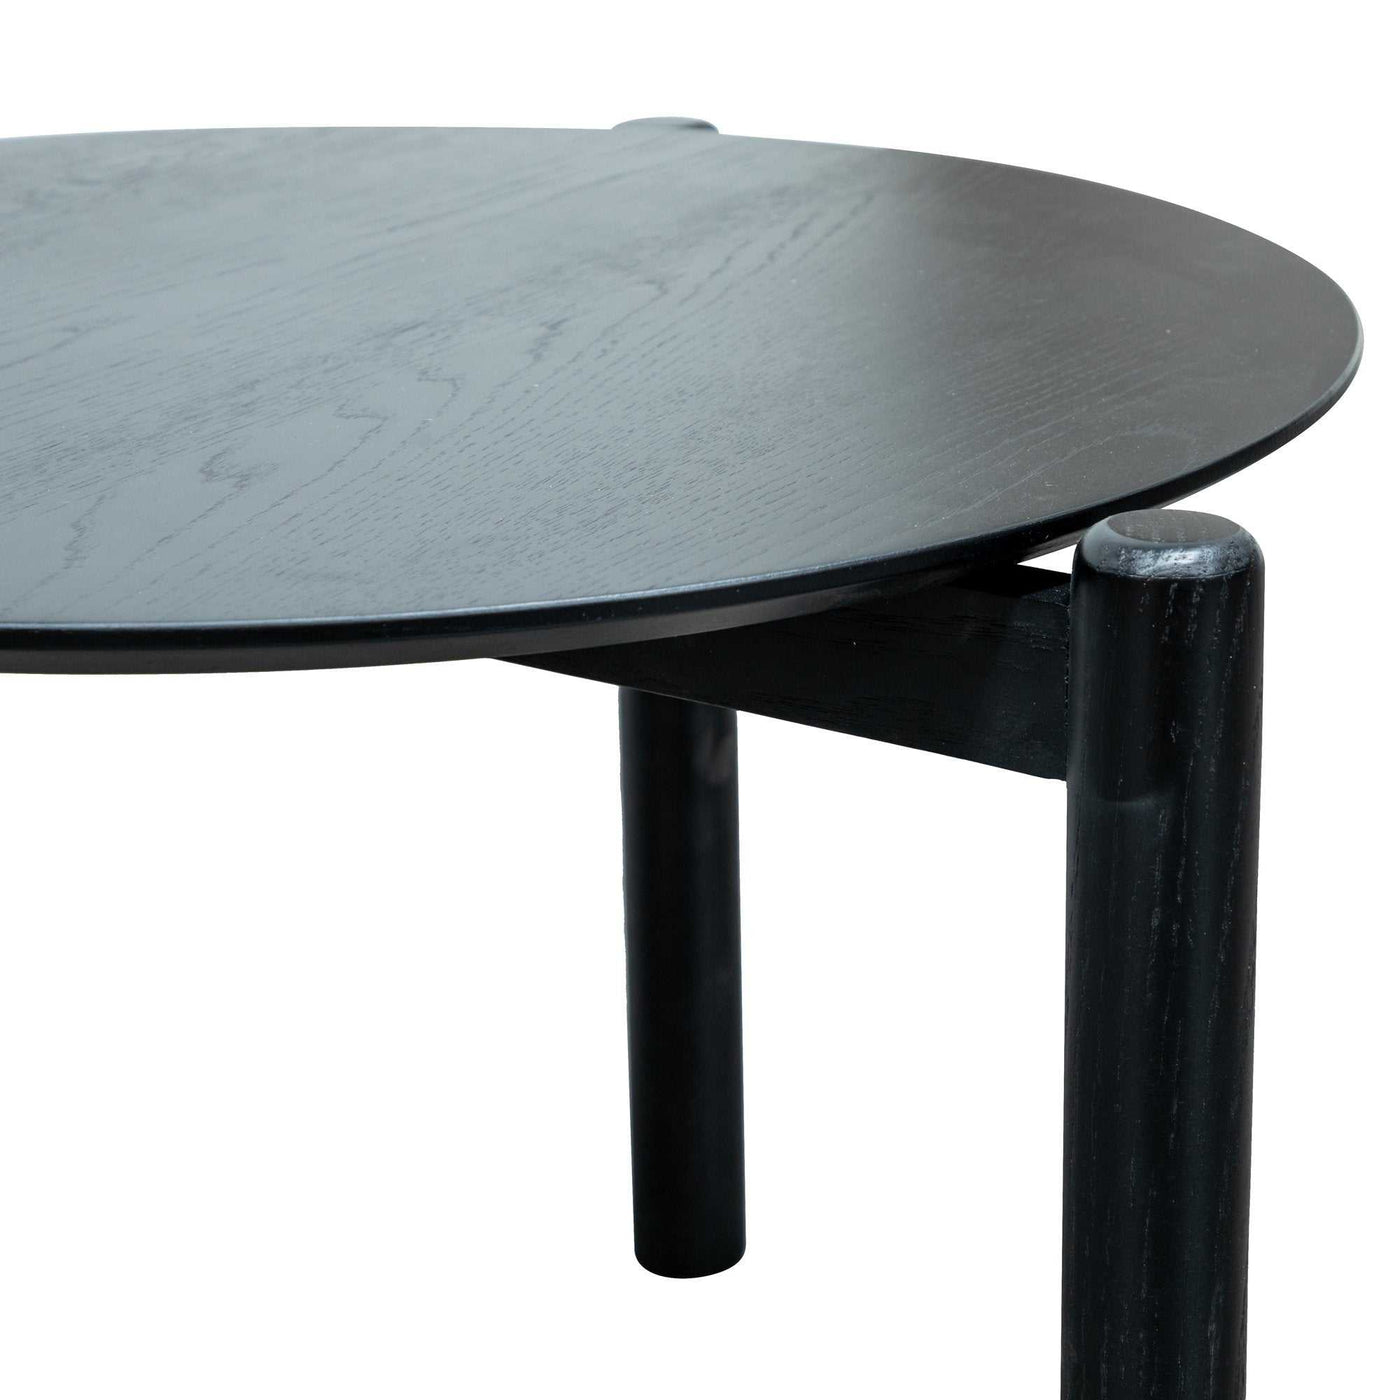 Nest of Coffee tables - Black